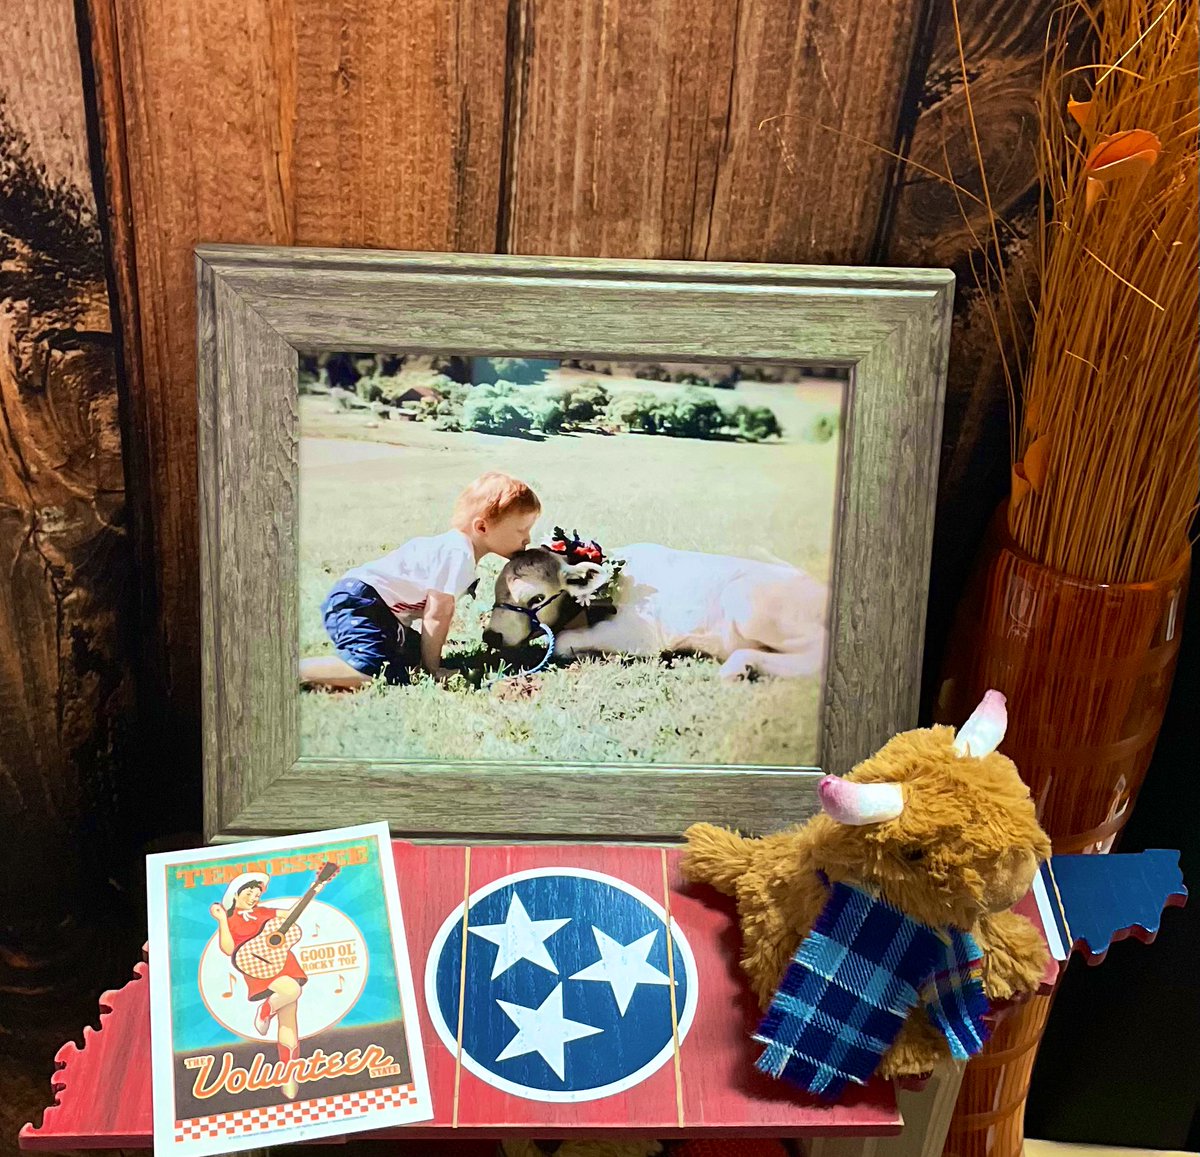 Look what made its way to Tennessee. My very own Wee Harris. 🐮 I’m so excited to introduce him to our local herd. Thanks @insideweebox, for giving me a wee taste of Scotland through these incredible gifts.
#wheresweebox @silverstagscot @EarthSquaredLtd @brodies1867 #justslateco